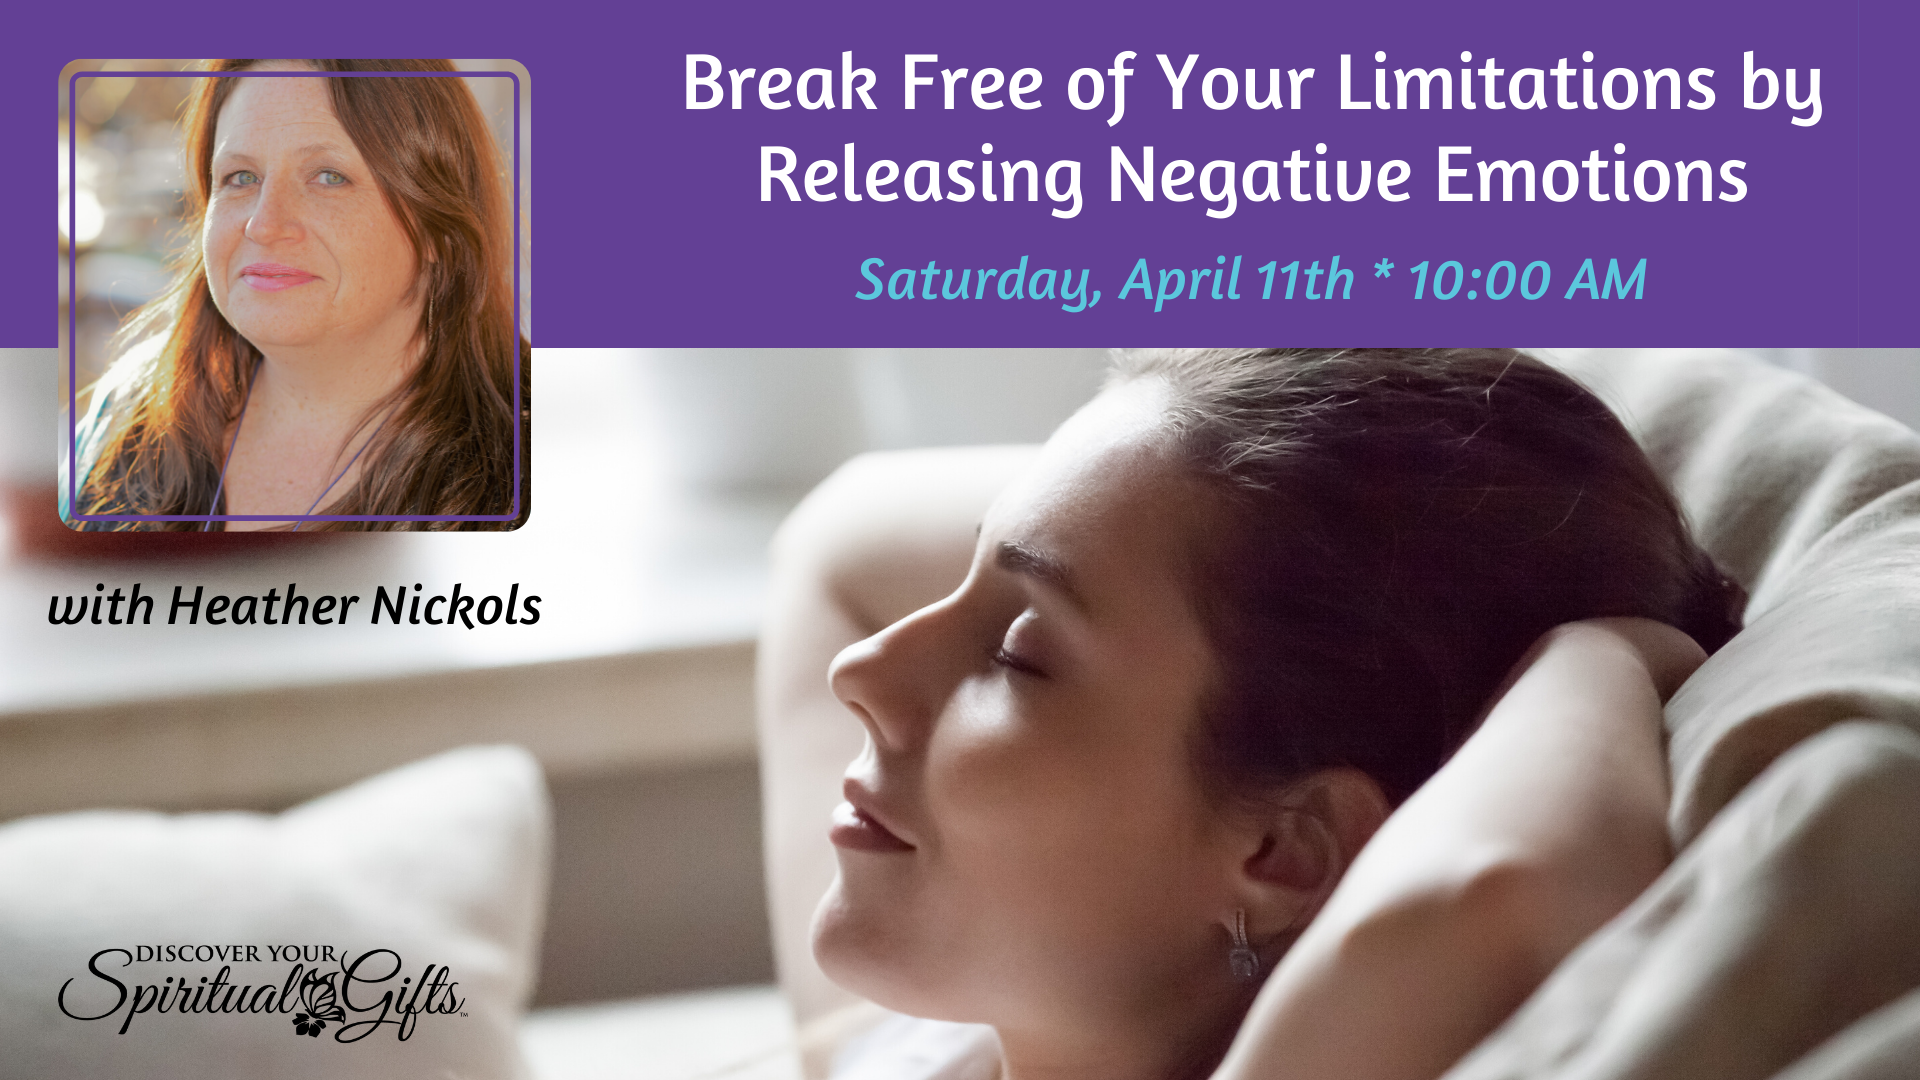 [ONLINE] Break Free of Your Limitations by Releasing Negative Emotions